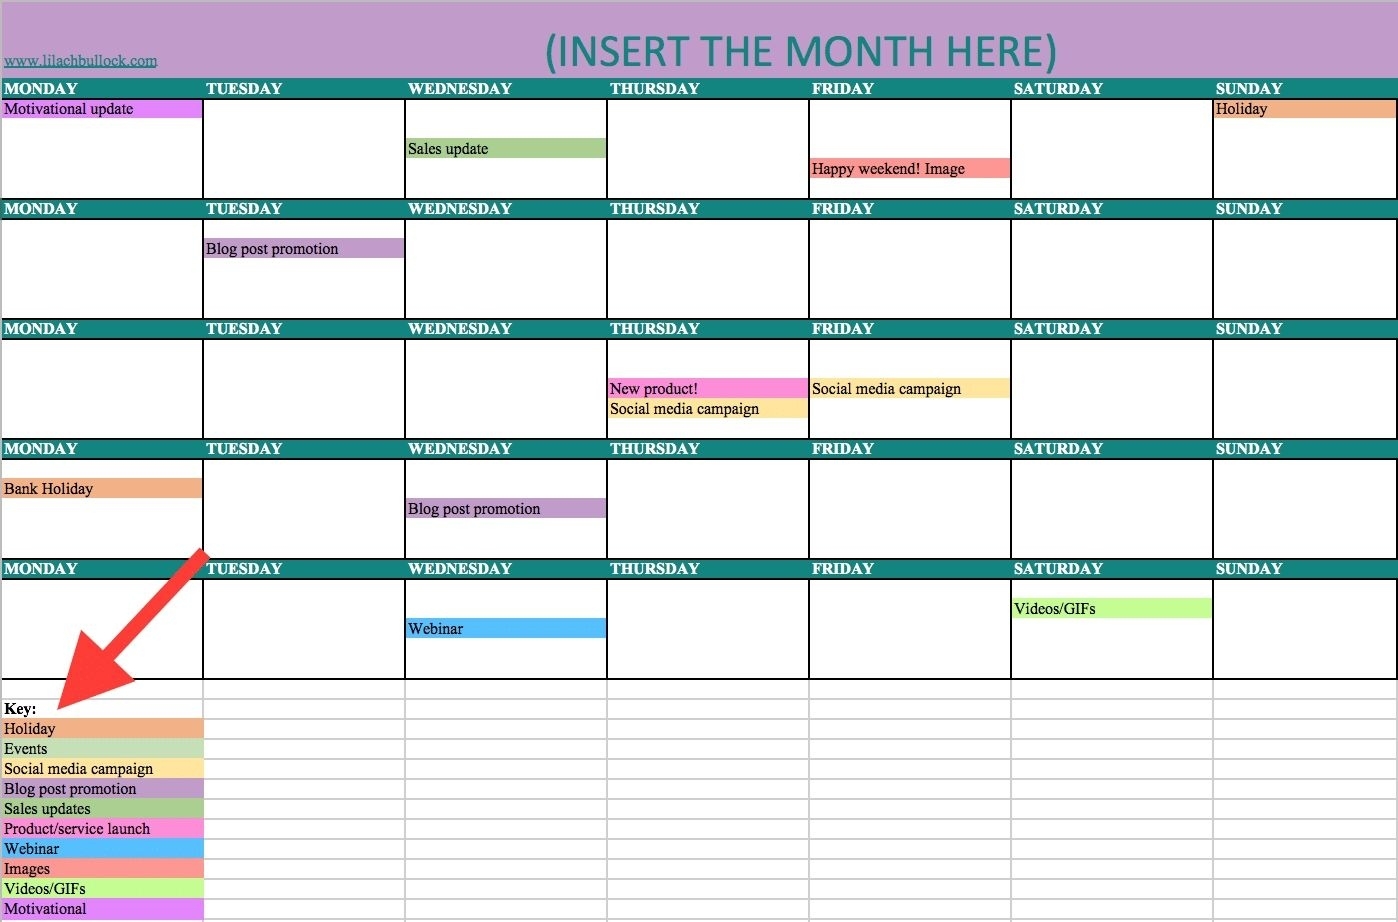 How To Free Color Coded Calendars | Social Media Calendar Calendar Template Color Coded